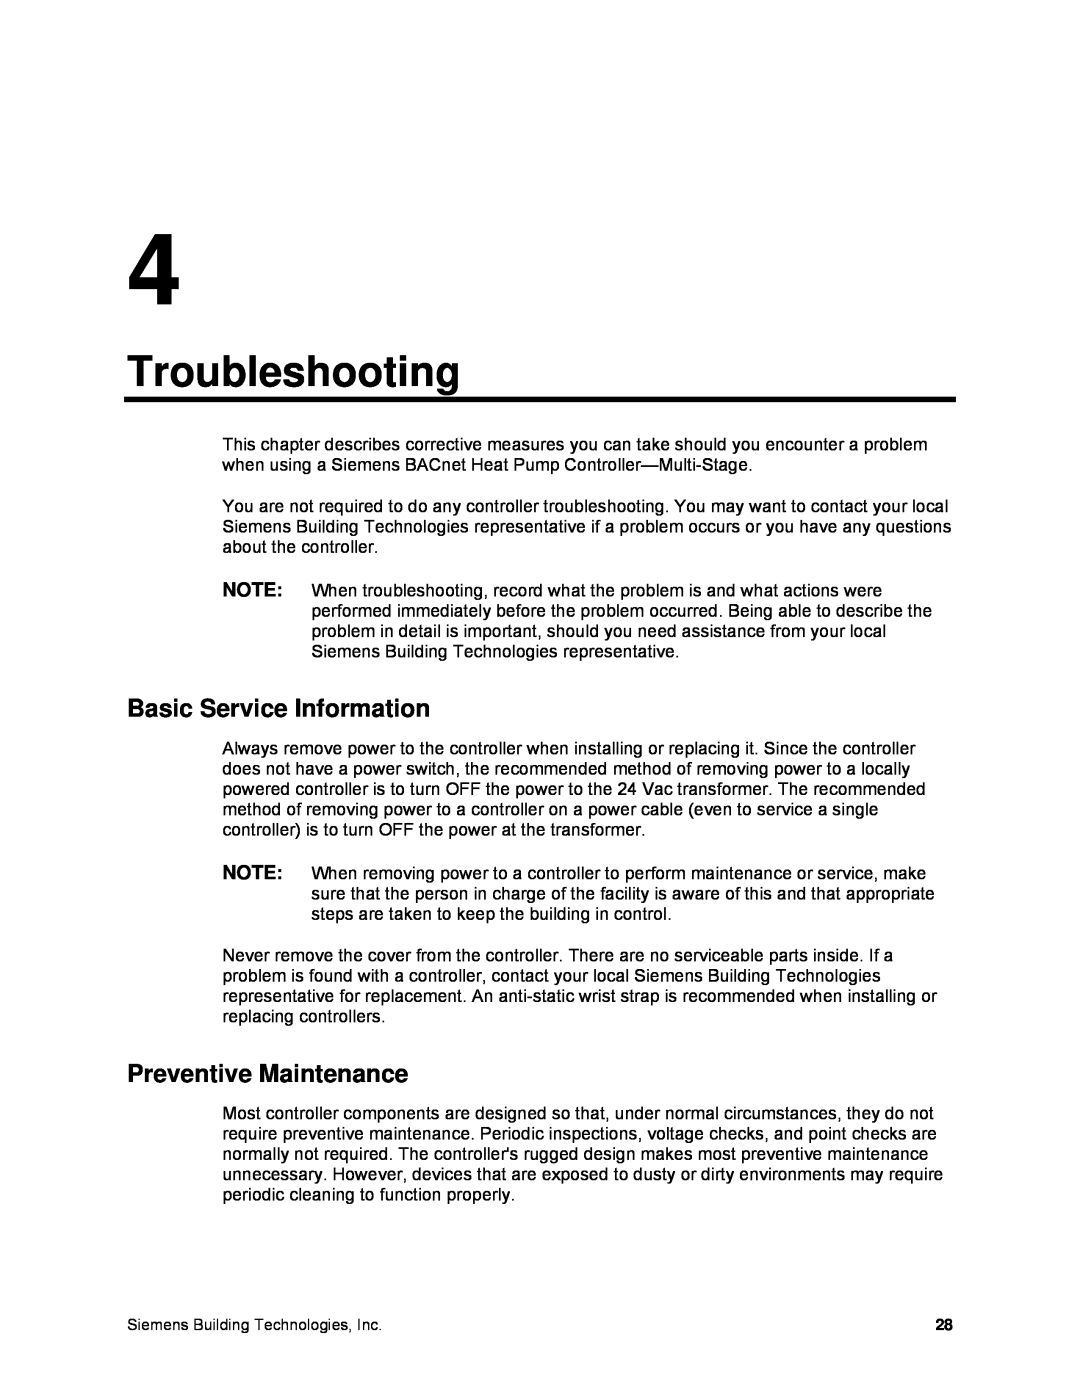 Siemens 125-699 owner manual Troubleshooting, Basic Service Information, Preventive Maintenance 